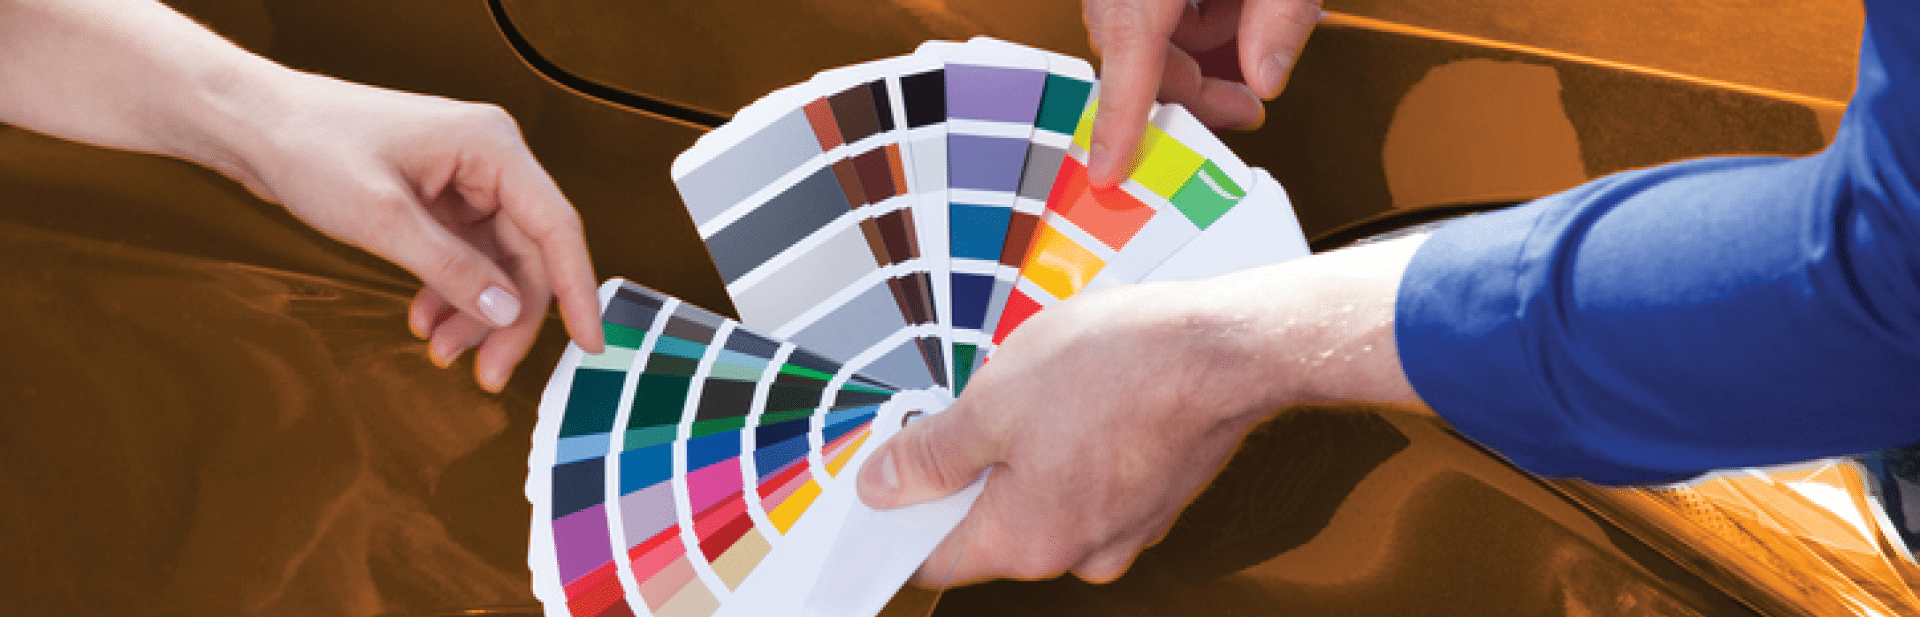 Cropped image of mechanic showing color samples to customer against car